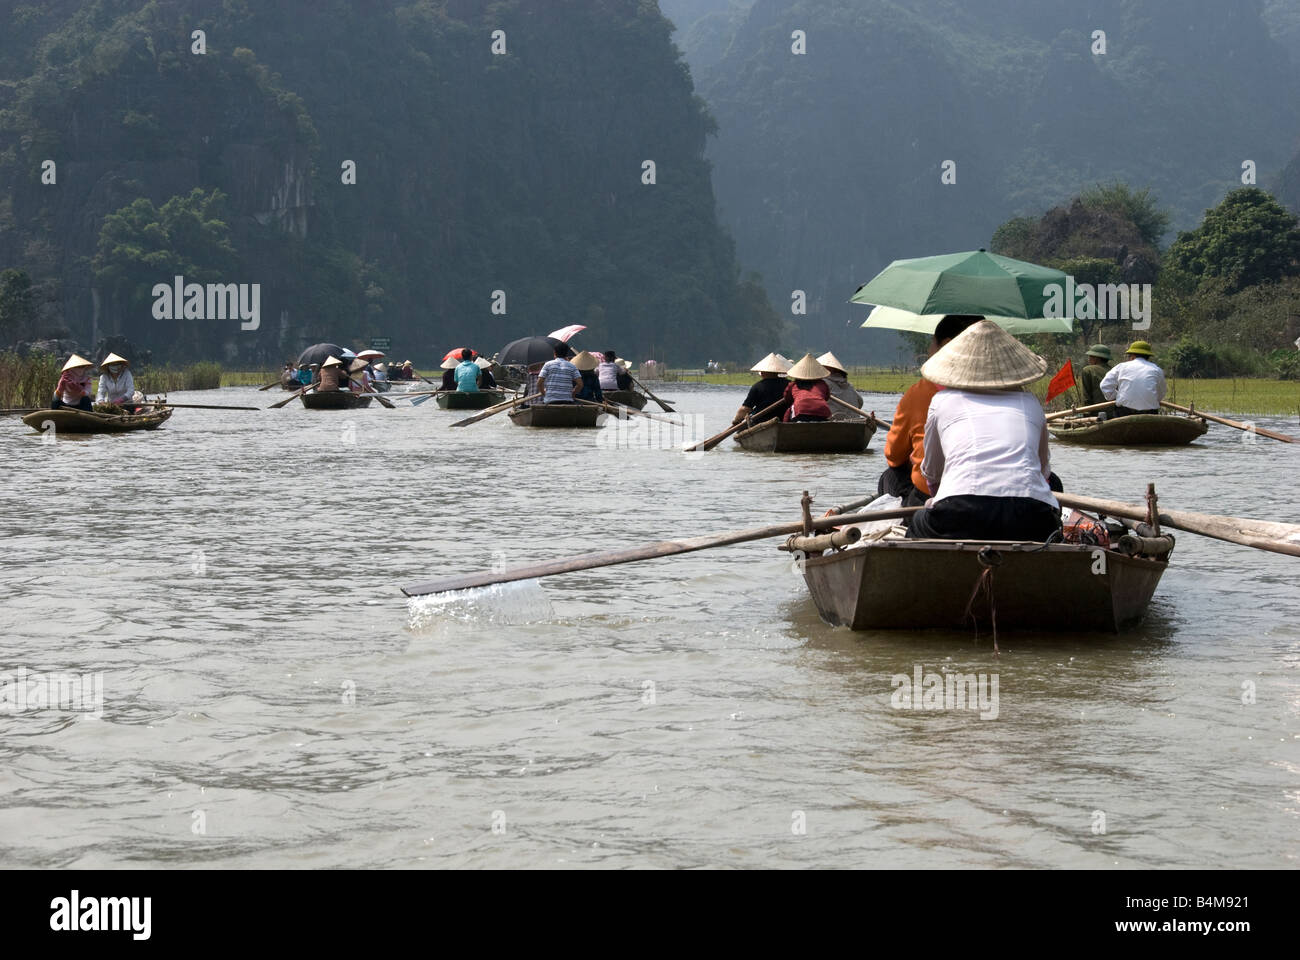 A boat ride on the Ngo Dong River Tam Coc, Vietnam Stock Photo